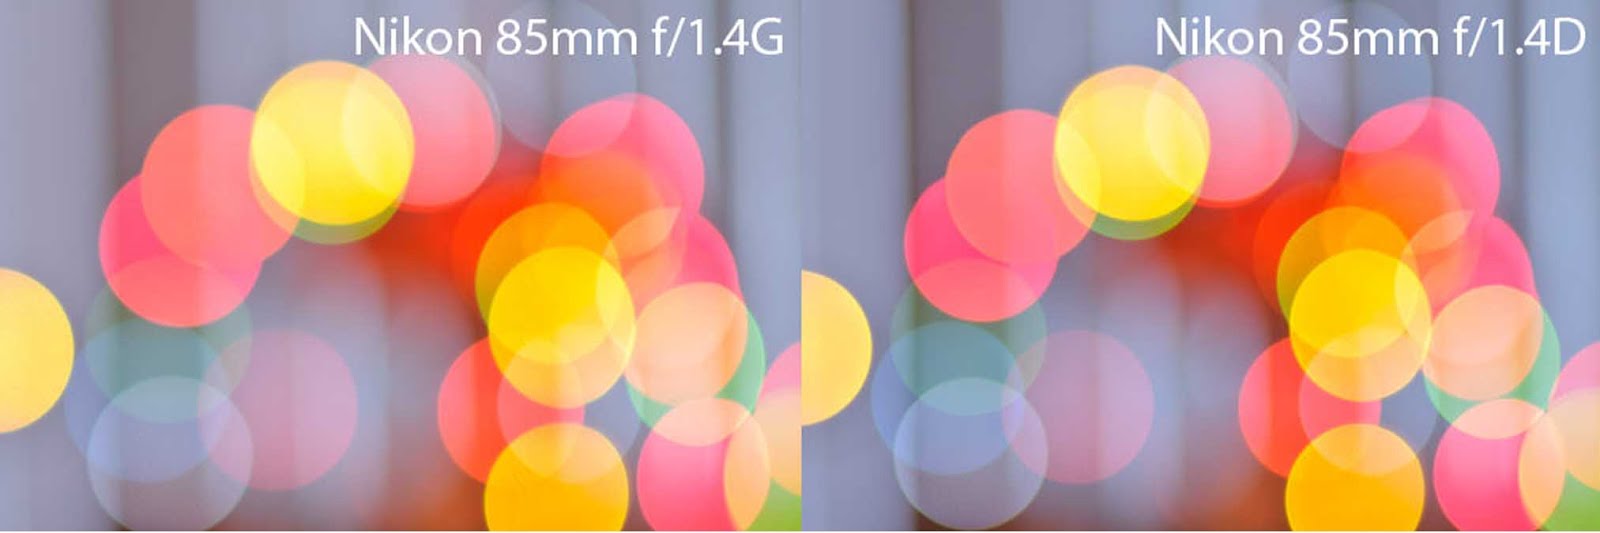 85mm f/1.4G Review